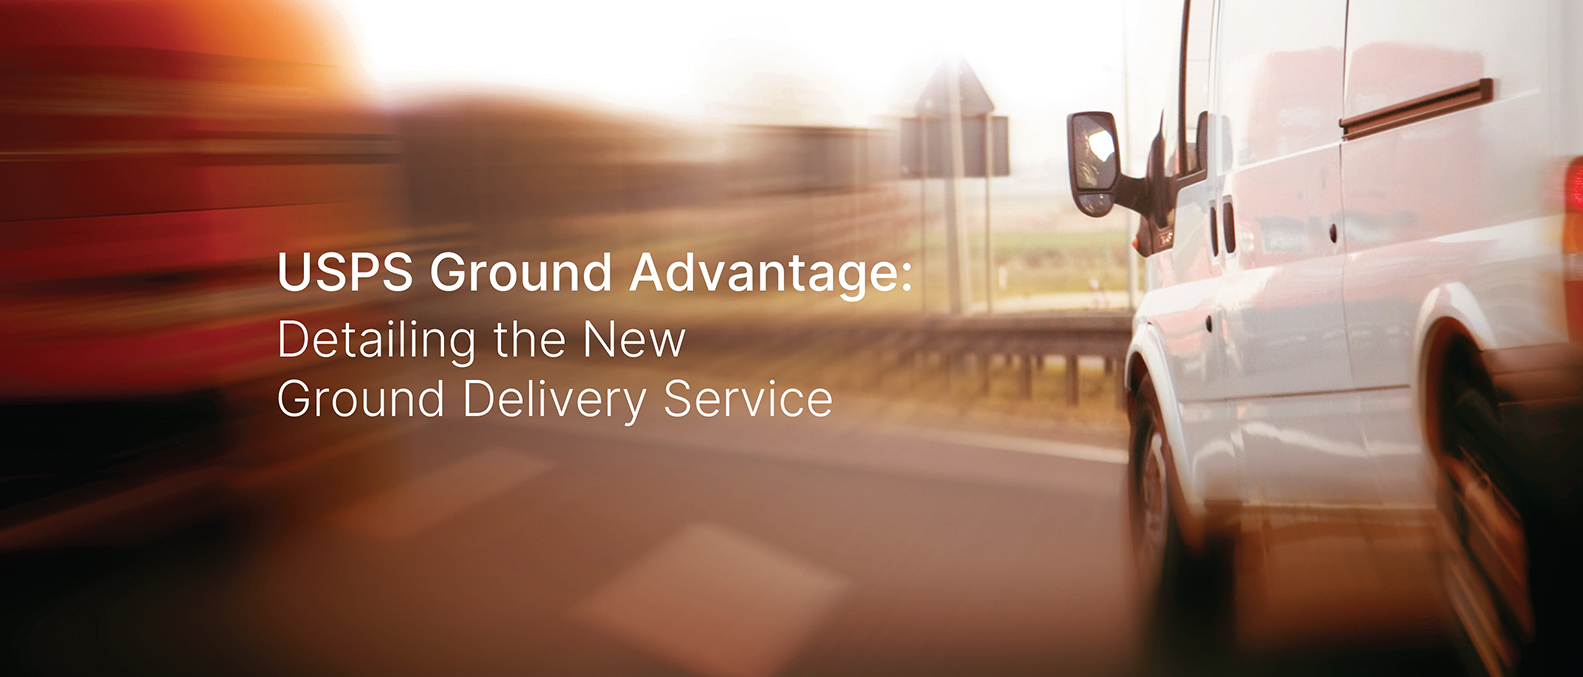 Are You Overlooking USPS Ground Advantage as an Alternative to FedEx and UPS Ground?